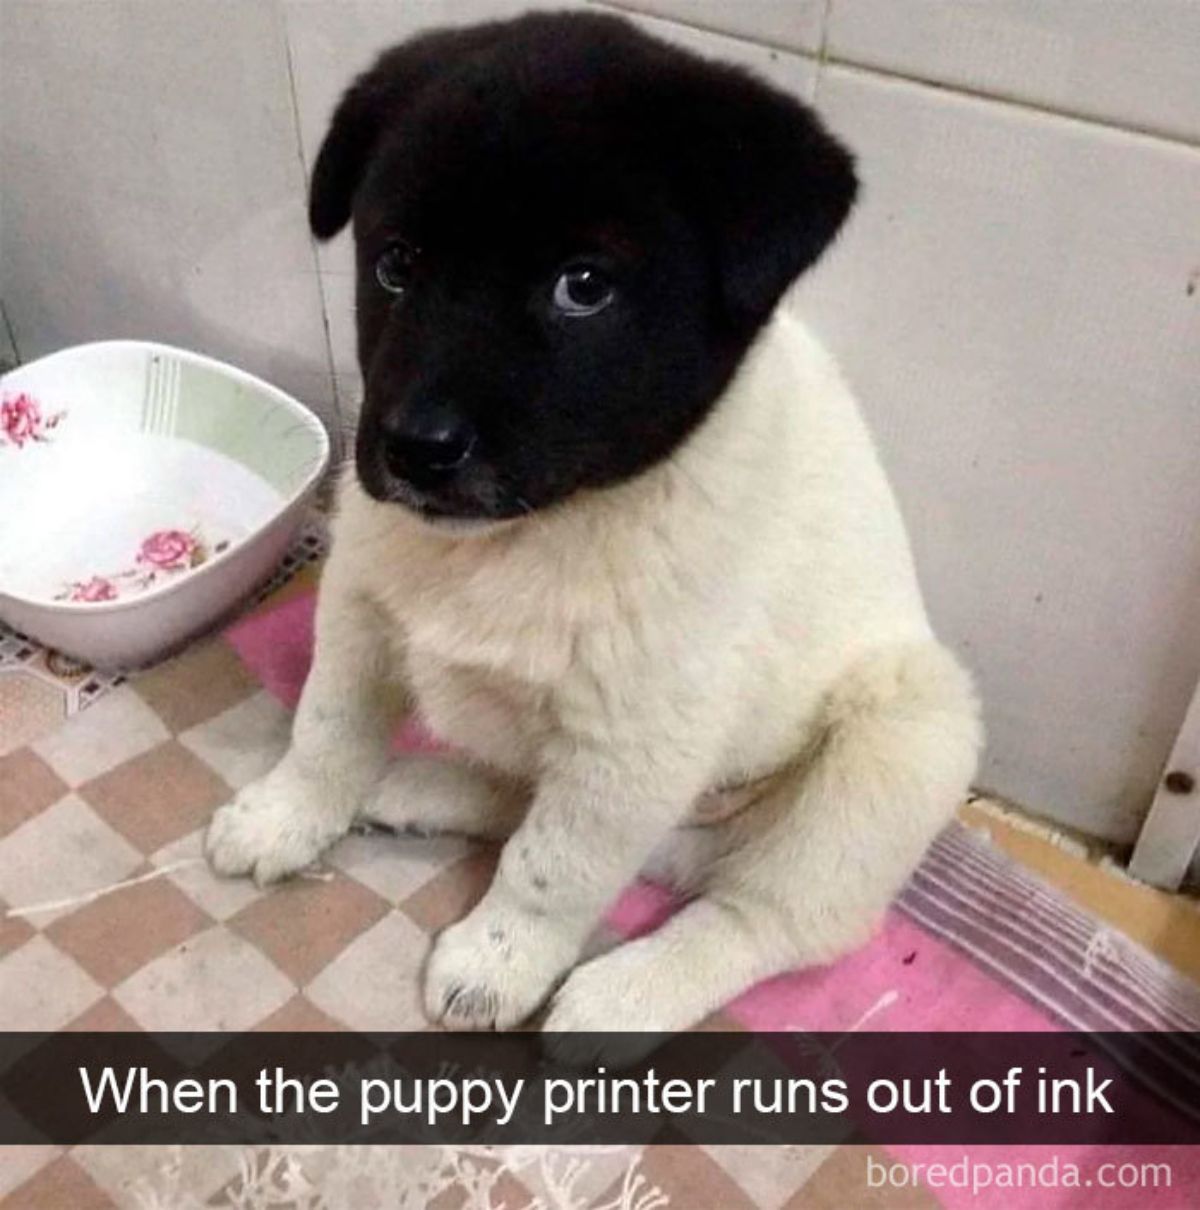 white puppy with a black head sitting on a brown and white checkered material with a caption saying when the puppy printer runs out of ink